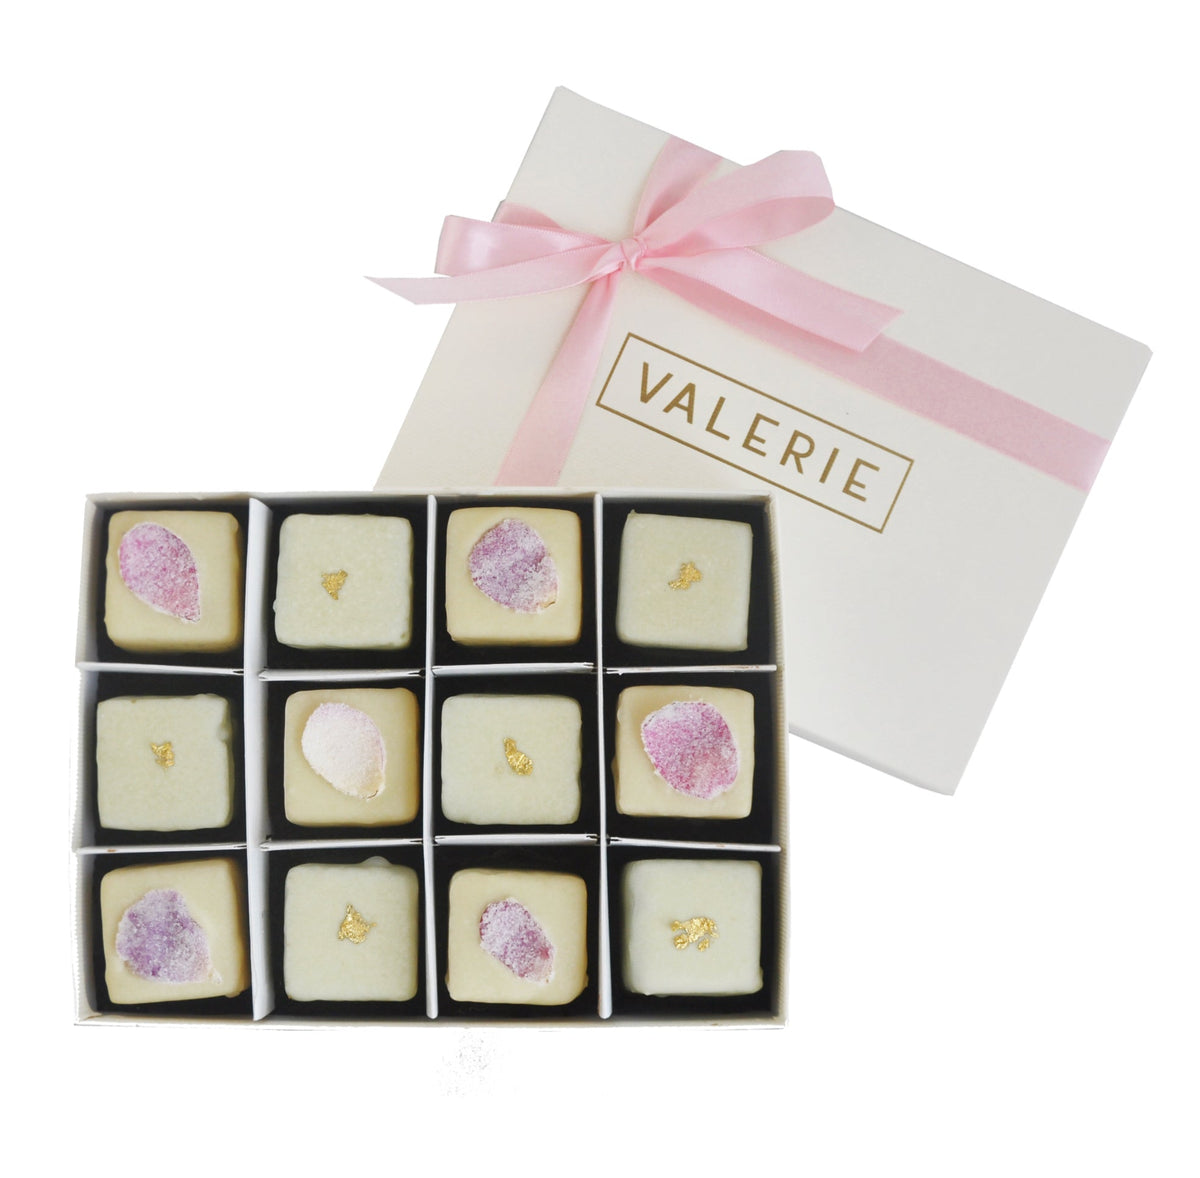 Box of 12 petits fours, six with rose petals and six with gold leaf, in a white box with a pink ribbon and “VALERIE” printed on the lid.